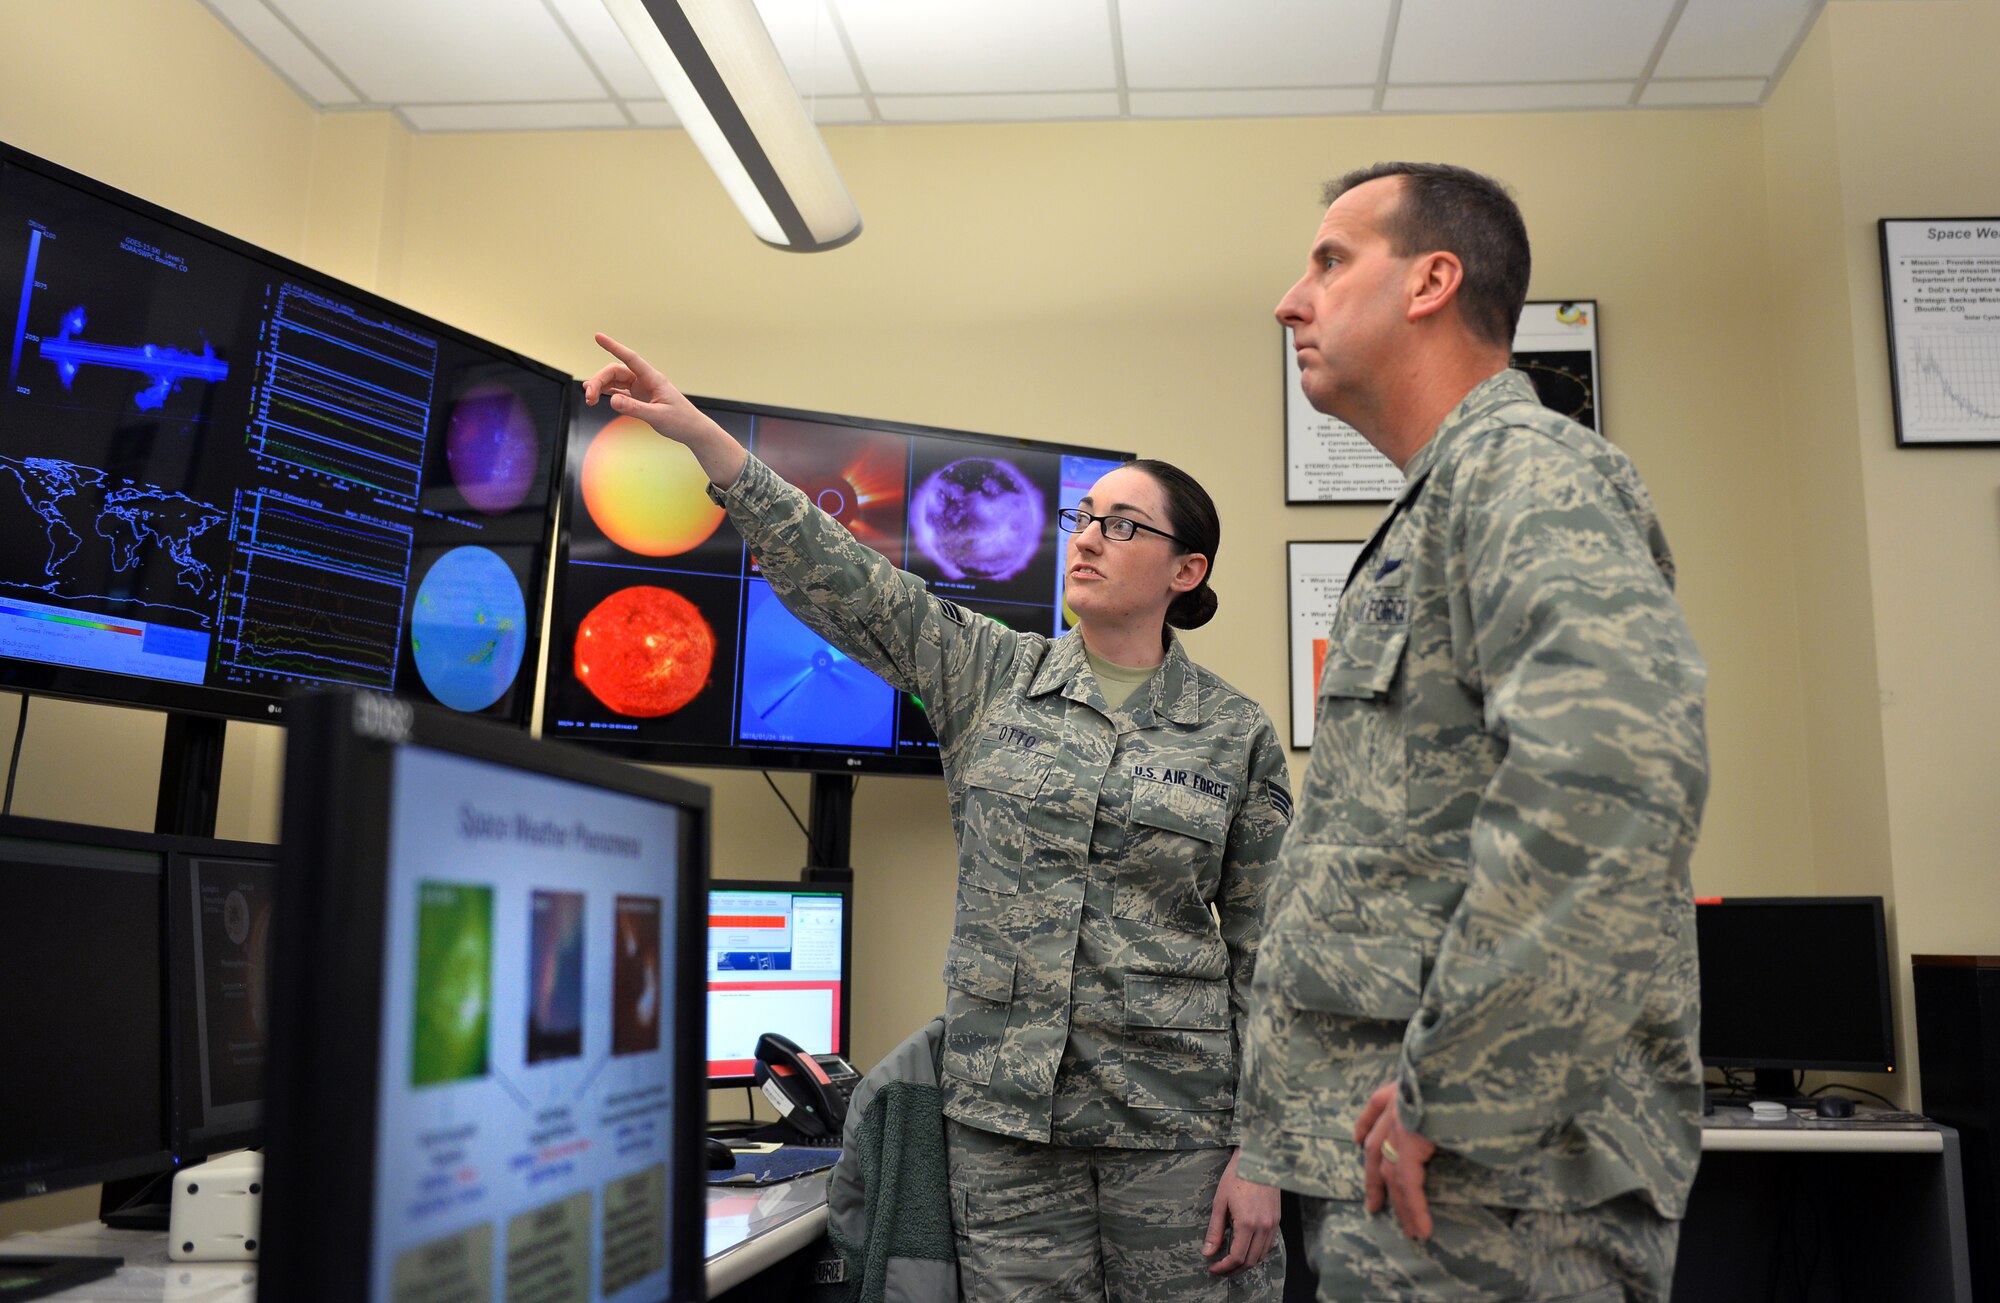 U.S. Air Force Senior Airman Amanda Otto, assigned to the 2nd Weather Squadron, discusses space weather with U.S. Air Force Col. Jay R. Bickley, 12th Air Force (Air Forces Southern) vice commander, as part of his tour of the 557th Weather Wing, Offutt Air Force Base, Neb., Jan. 25, 2016.  Bickley spent the day meeting  Airmen and learning about their daily operations.  (U.S. Air Force photo by Josh Plueger/released)